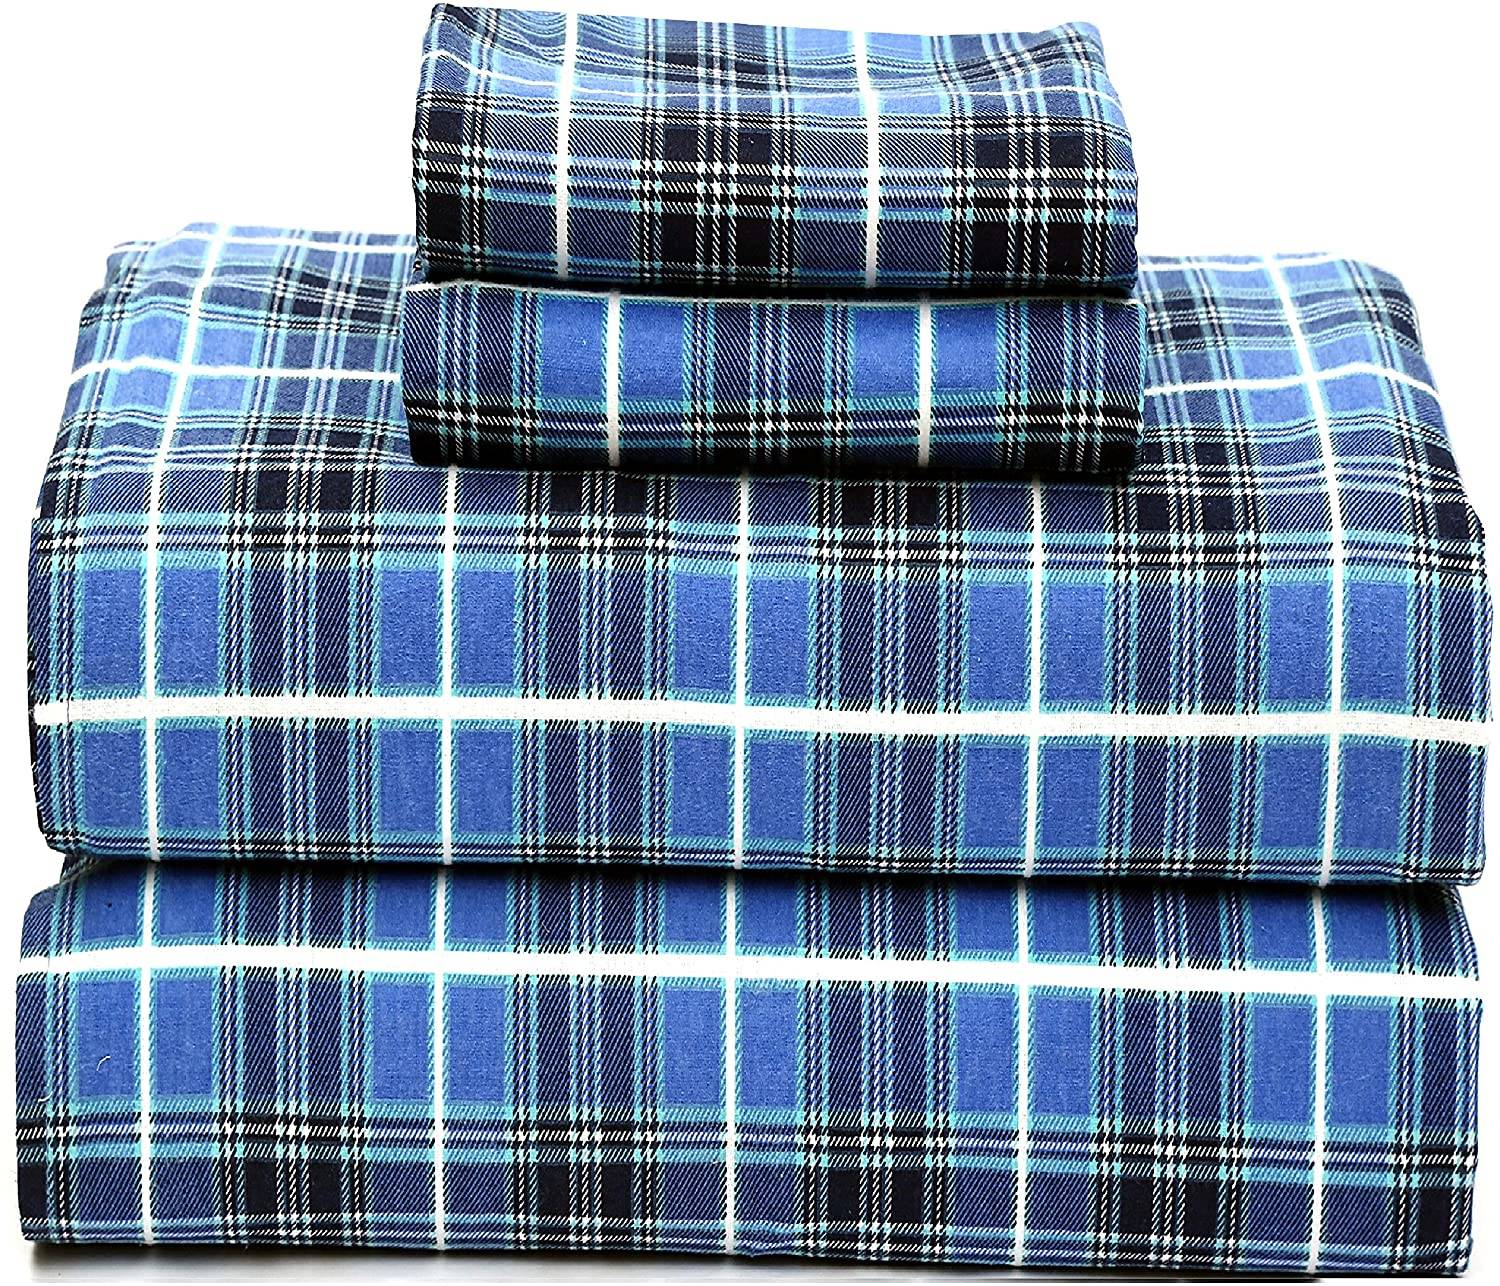 Royals Heavy Soft 100% Cotton Flannel Sheets Thick 3pc Bed Sheet Set Twin XL Blue Heavy and Ultra Soft Cotton Flannel Deep Pocket